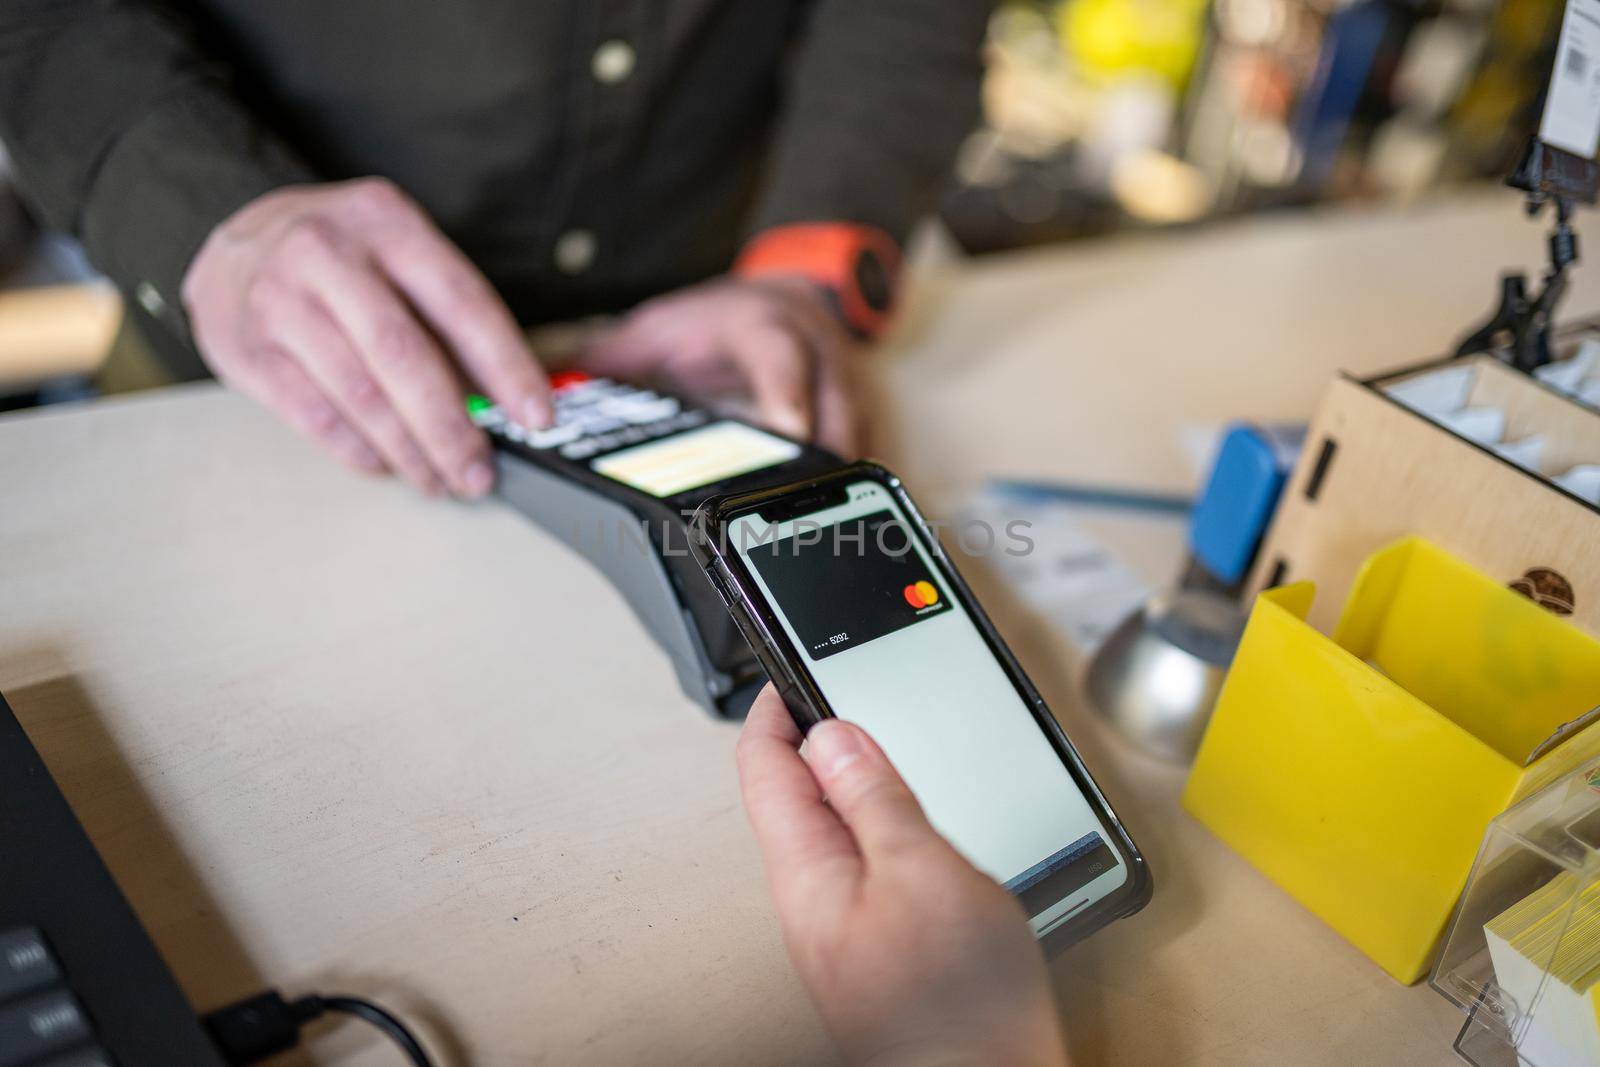 Close-up of woman making payment through NFC. Woman pays via payment terminal and mobile phone. Cashier hand holding credit card reader machine while client holding phone for NFC payment.